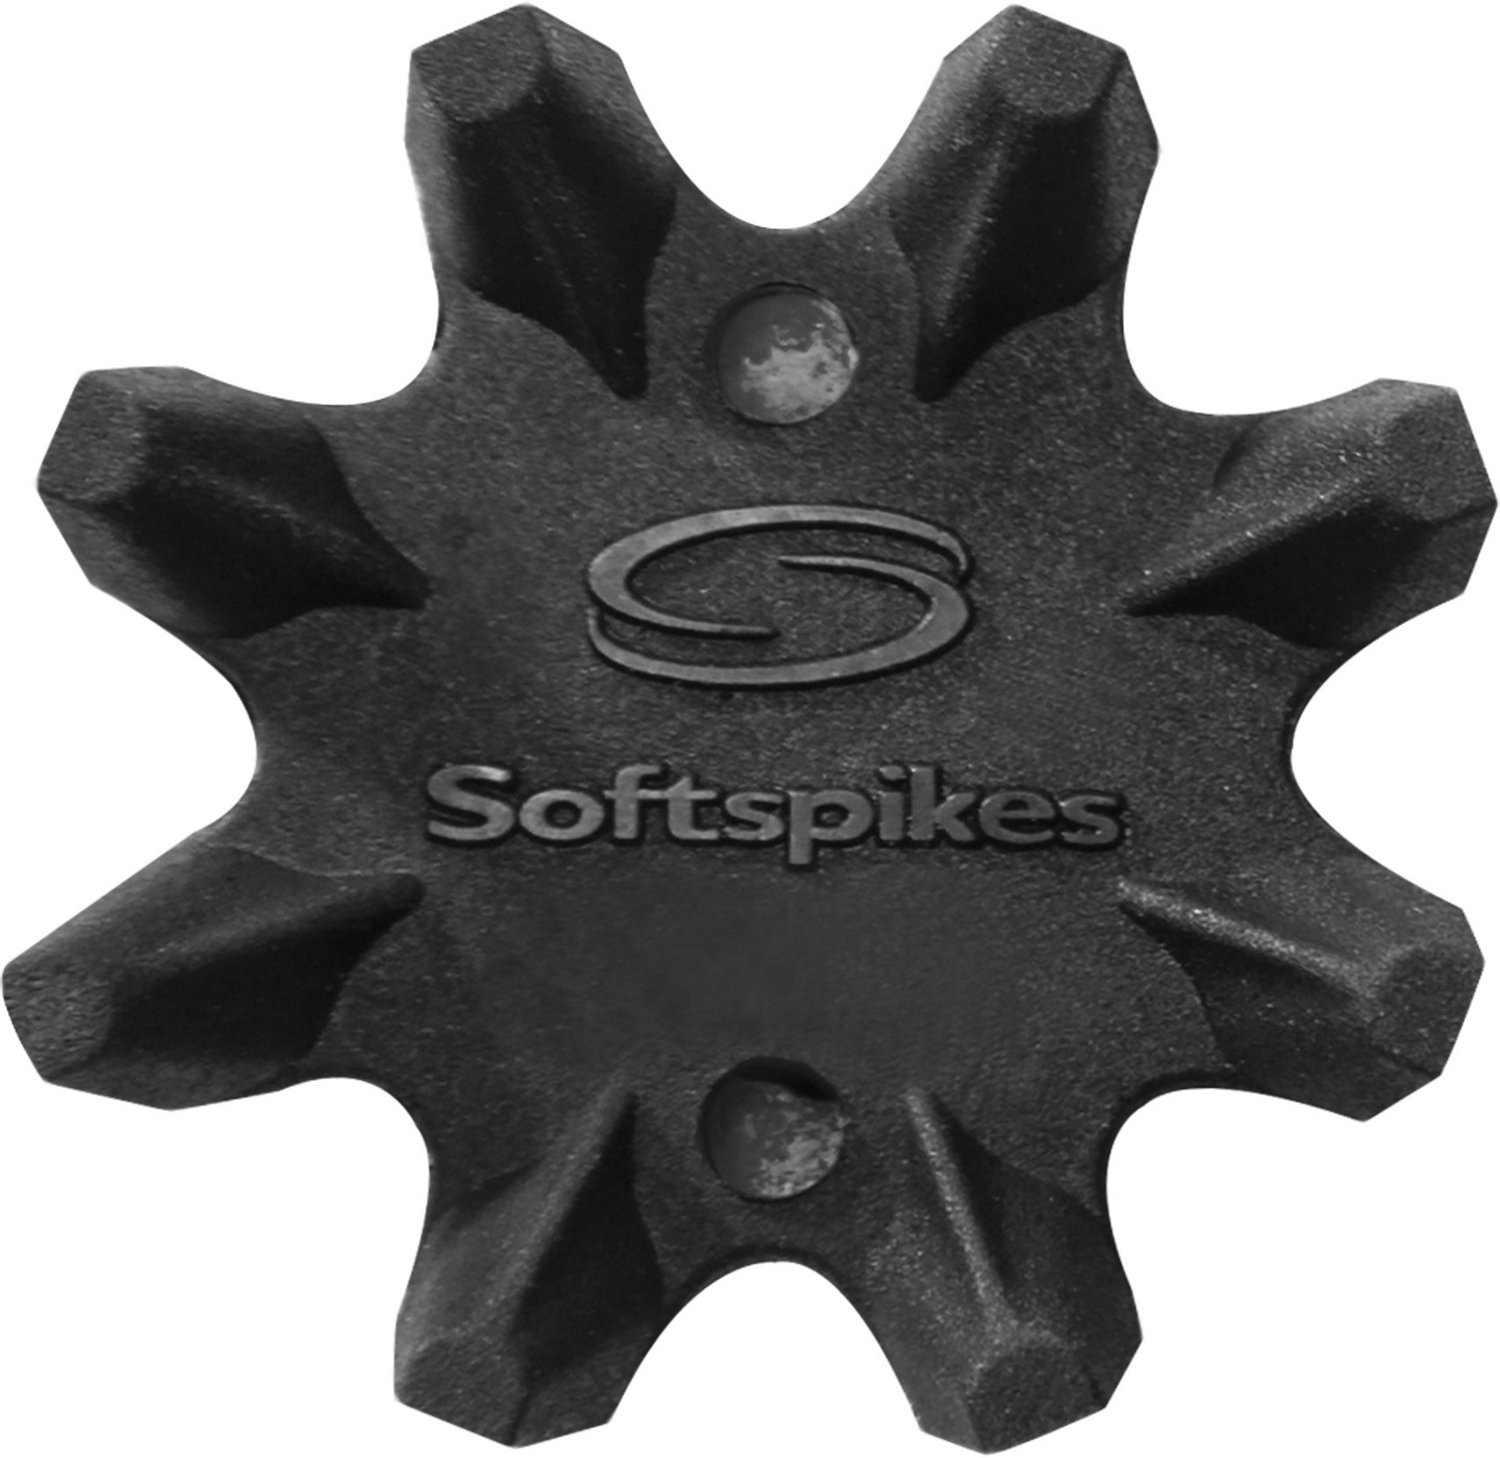 Softspikes Black Widow Fast-Twist Golf Shoe Spikes 16-Pack                                                                       - view number 2